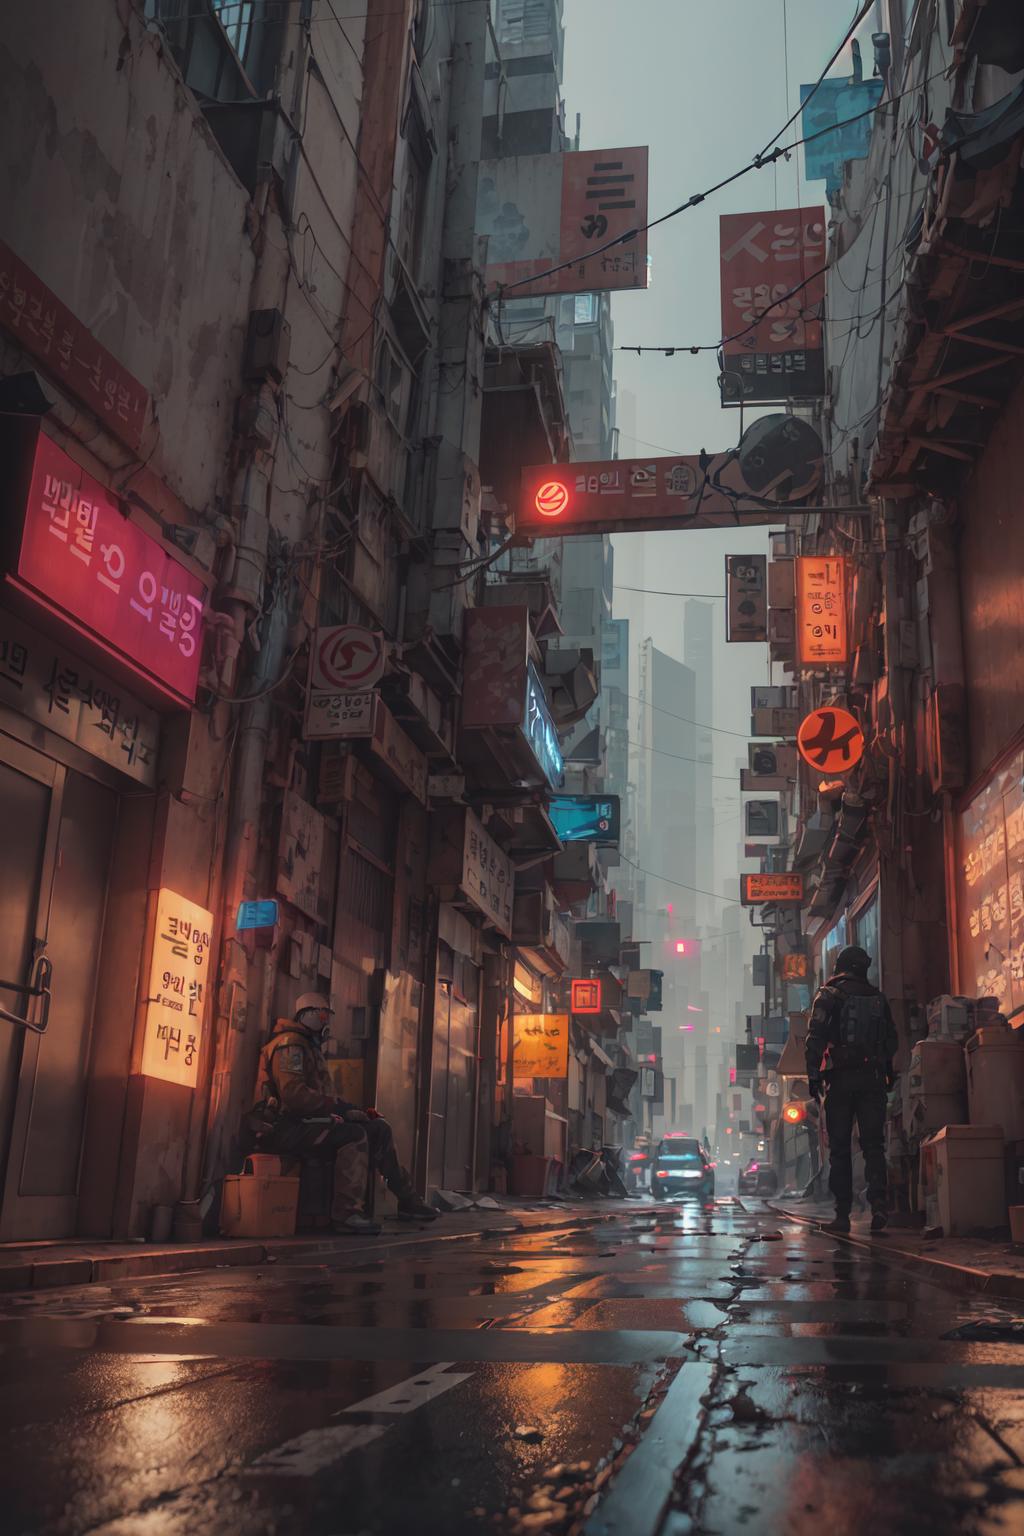 A person walking down a busy Asian city street at night.